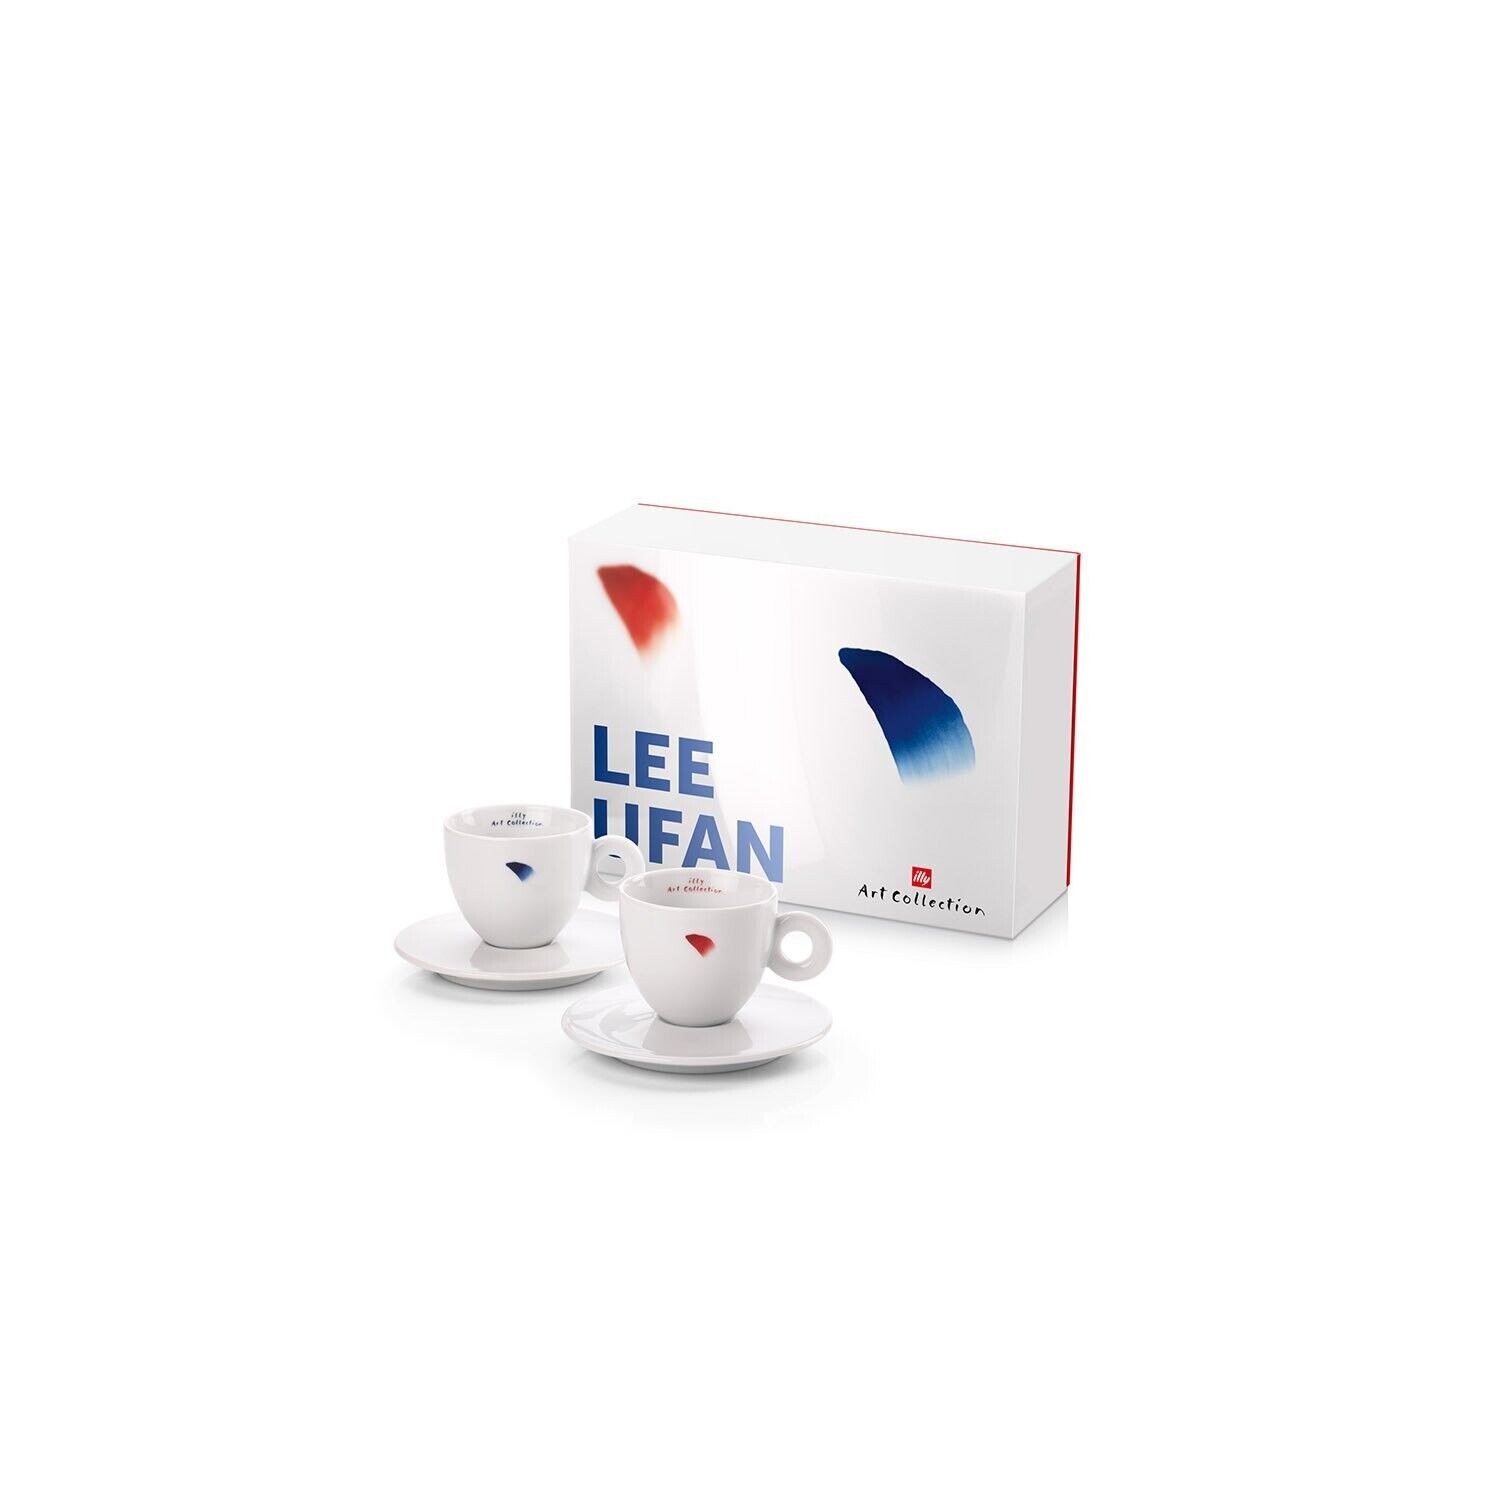 ILLY ART COLLECTION 24730 Lee Ufan 2 Tazze da Cappuccino Numerate Firmate